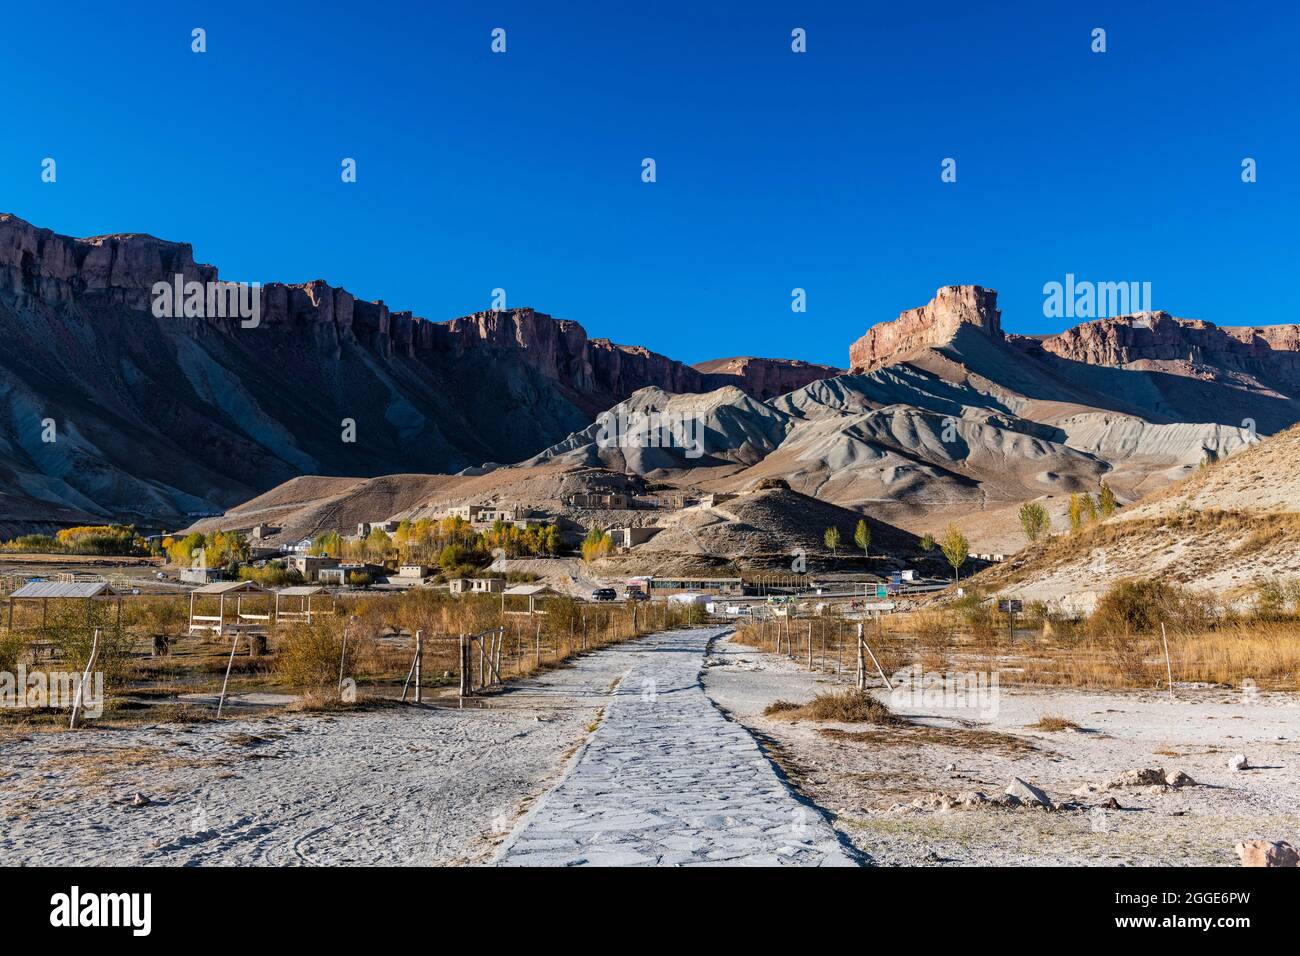 Mountain village in the Unesco National Park, Band-E-Amir National Park, Afghanistan Stock Photo